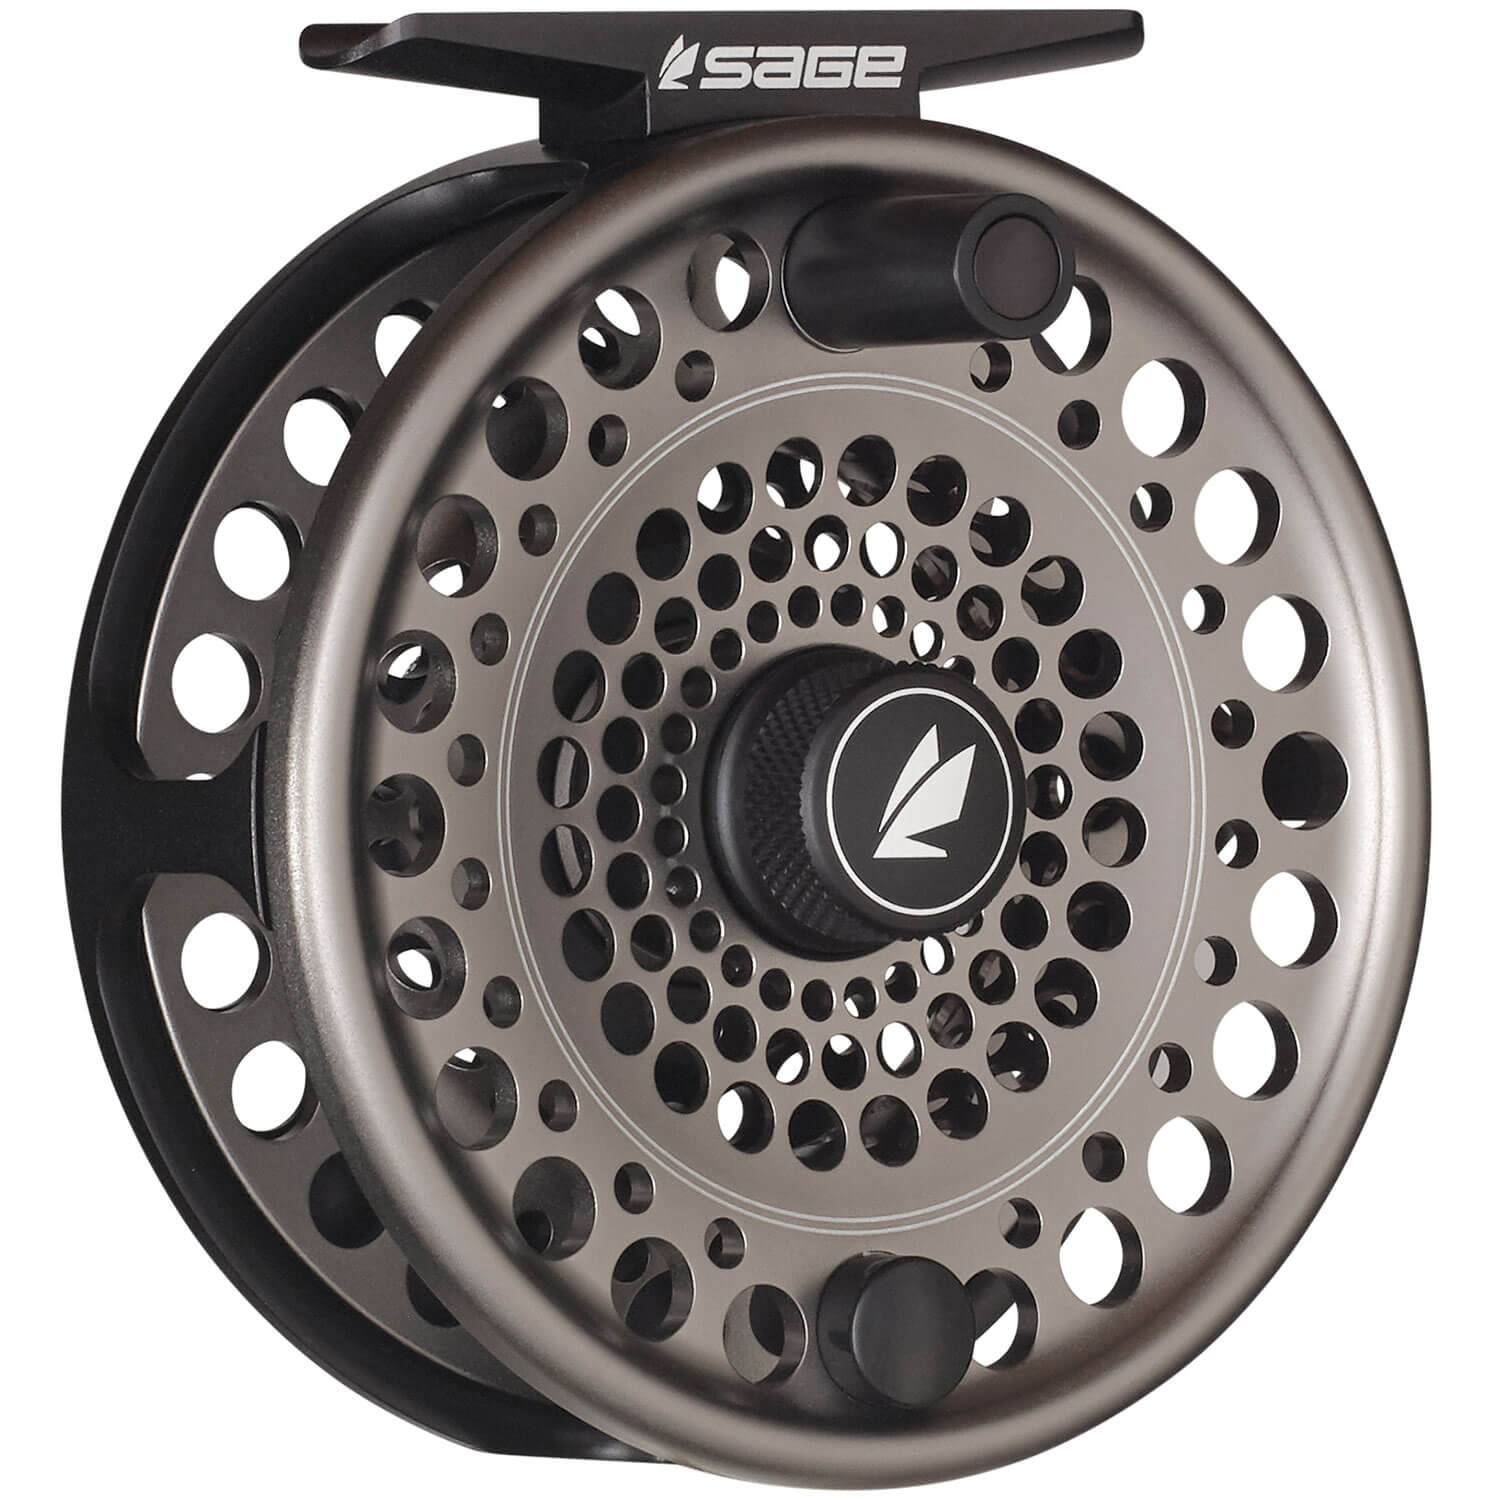 Sage Fly Reels -- A Perfect Match for your Favorite Sage Rod